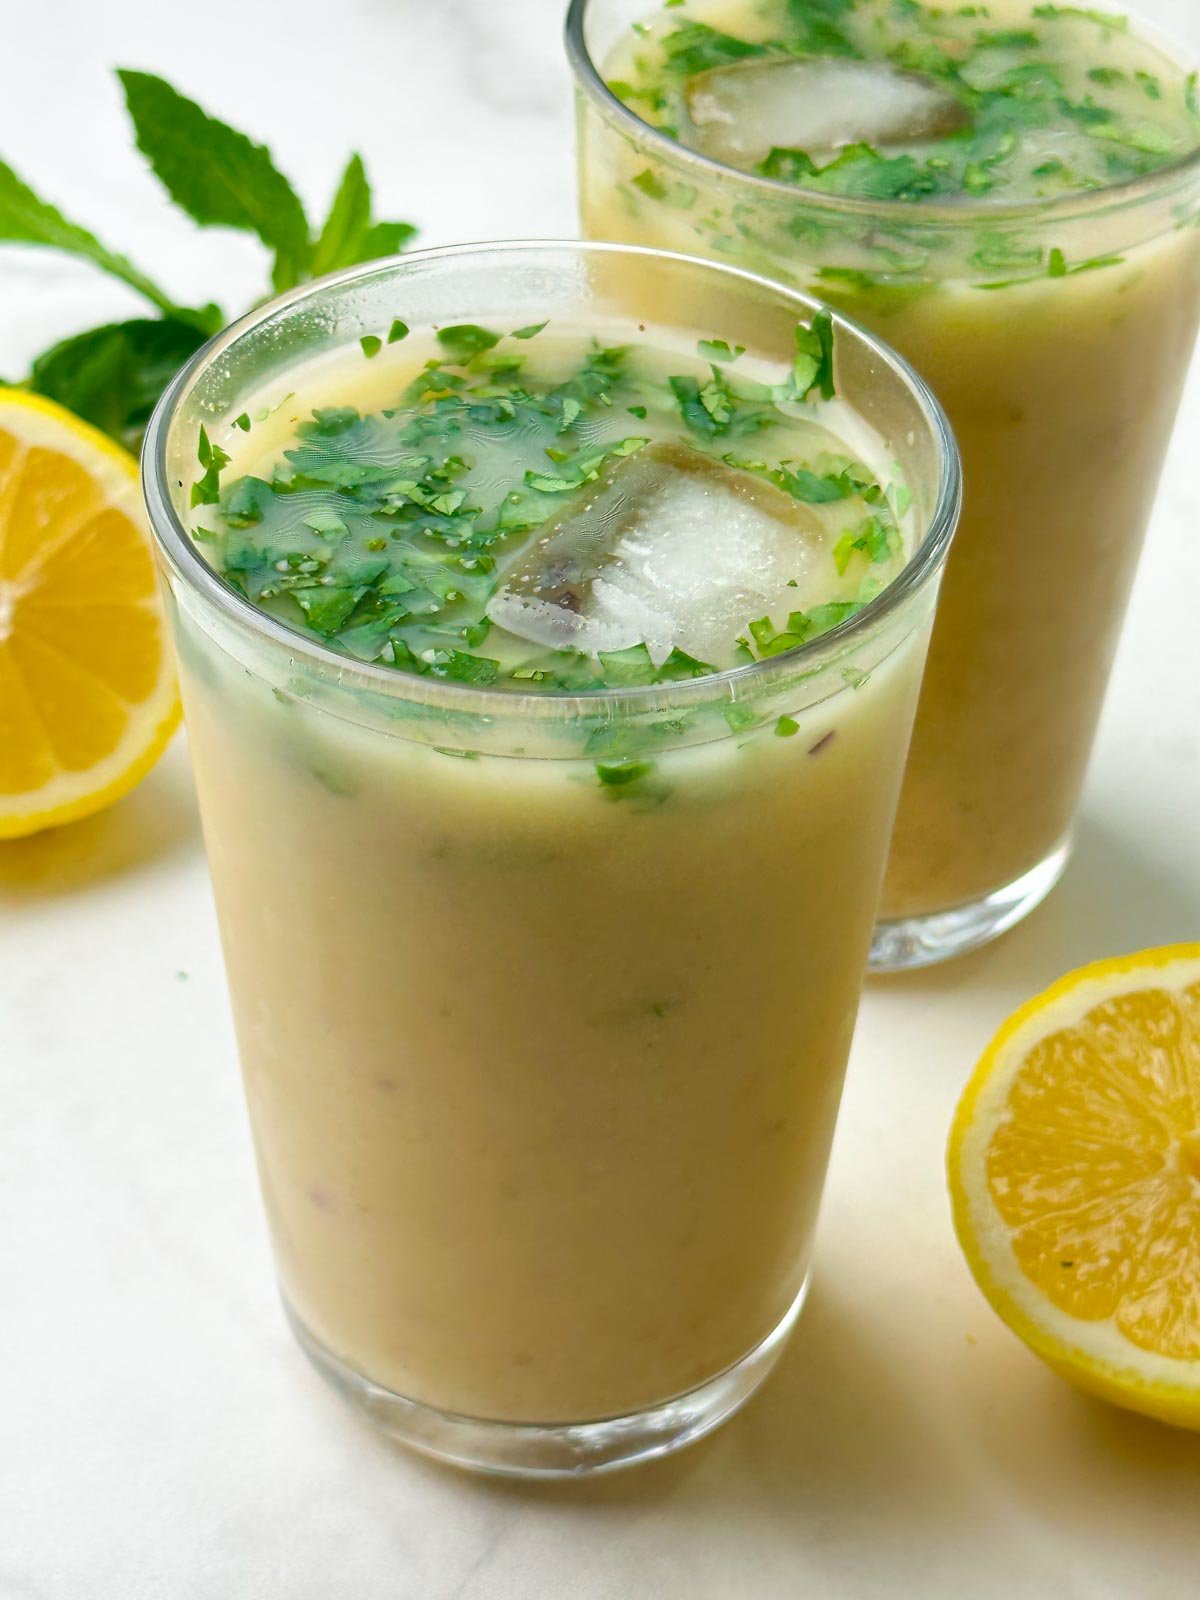 salted sattu sharbat recipe (drink) served in a tall glass garnished with mint and lemon on the side